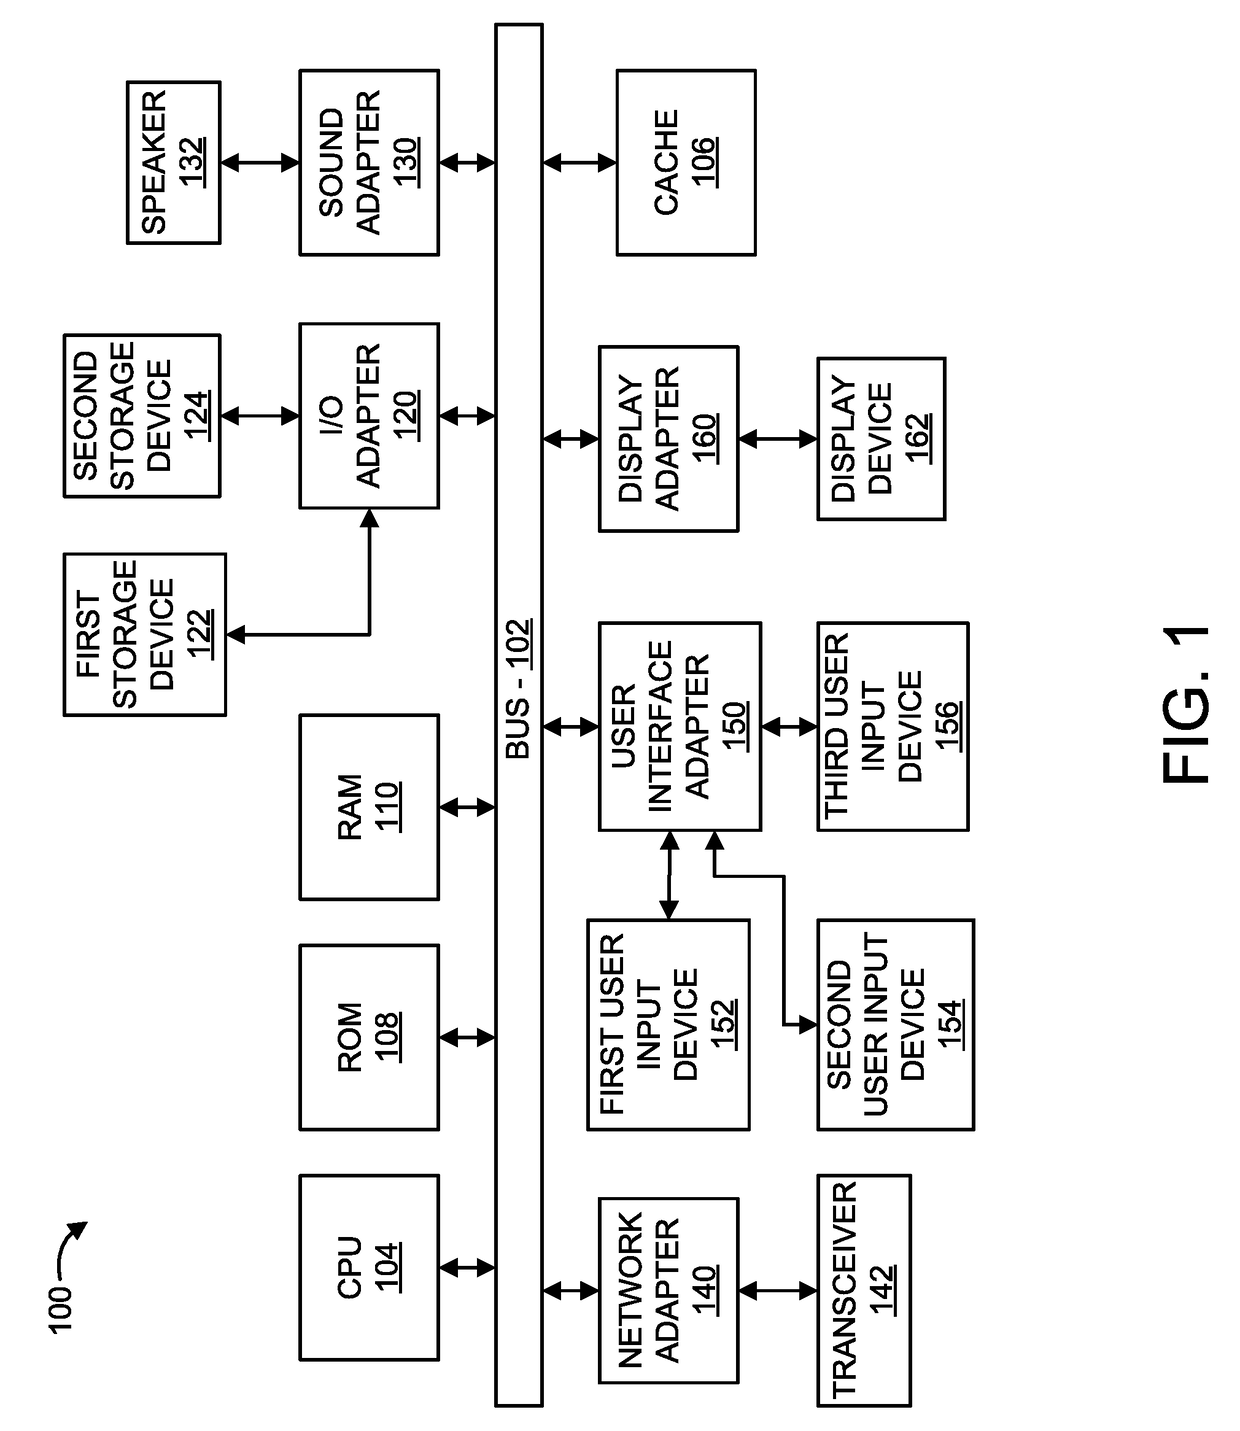 System and method for simulating traffic flow distributions with approximated vehicle behavior near intersections